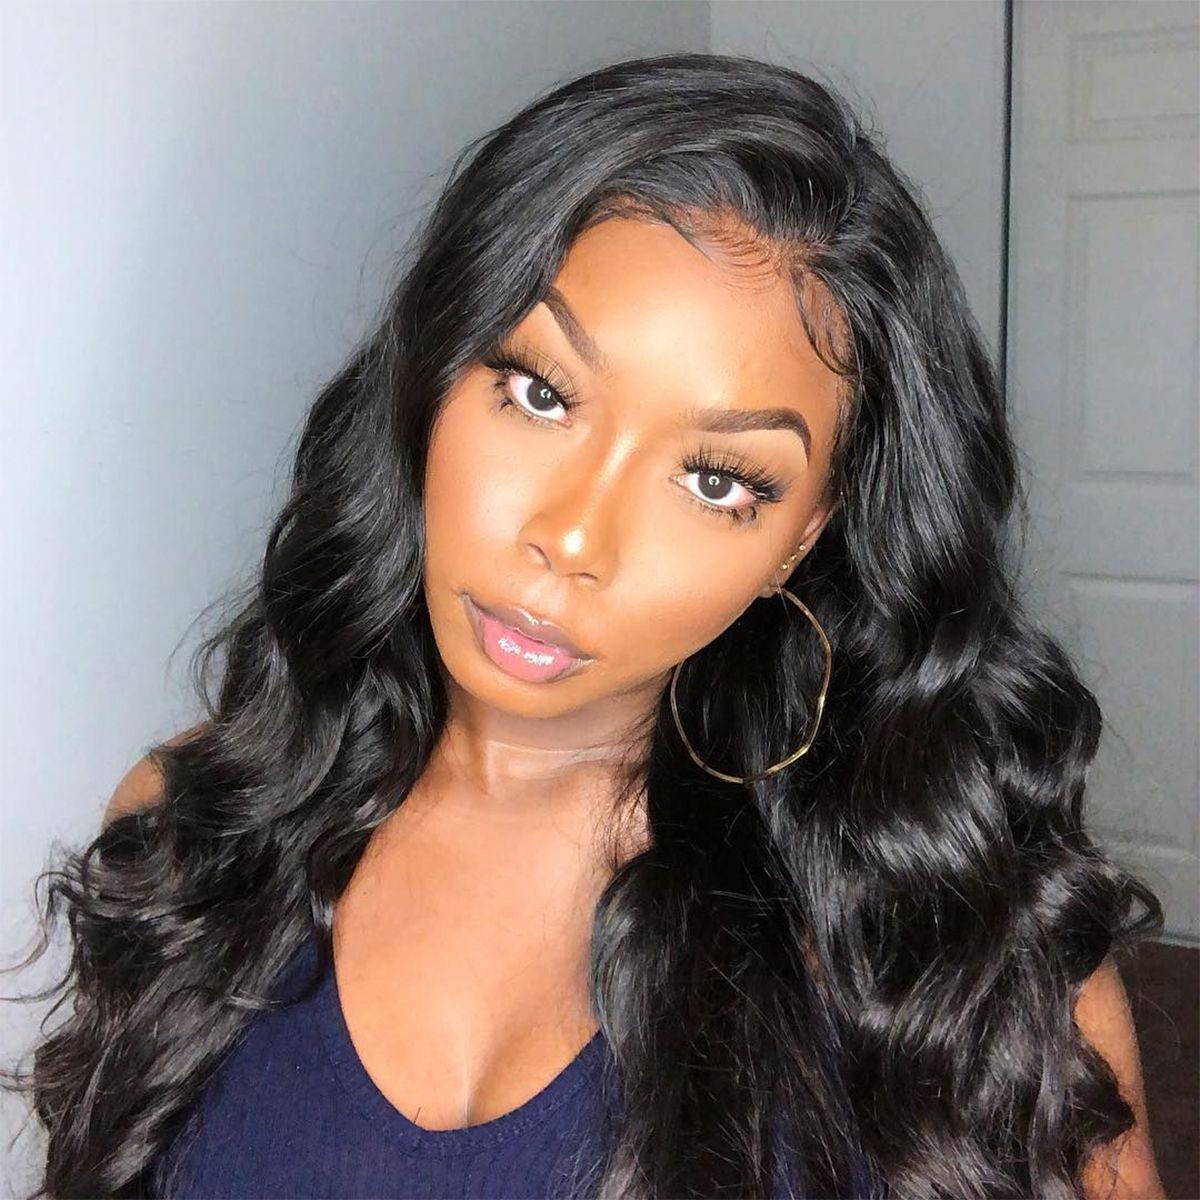 Withme Hair 4×4 Lace Closure Wigs Brazilian Body Wave Human Hair Lace Wig Pre Plucked Lace Wigs - Withme Hair